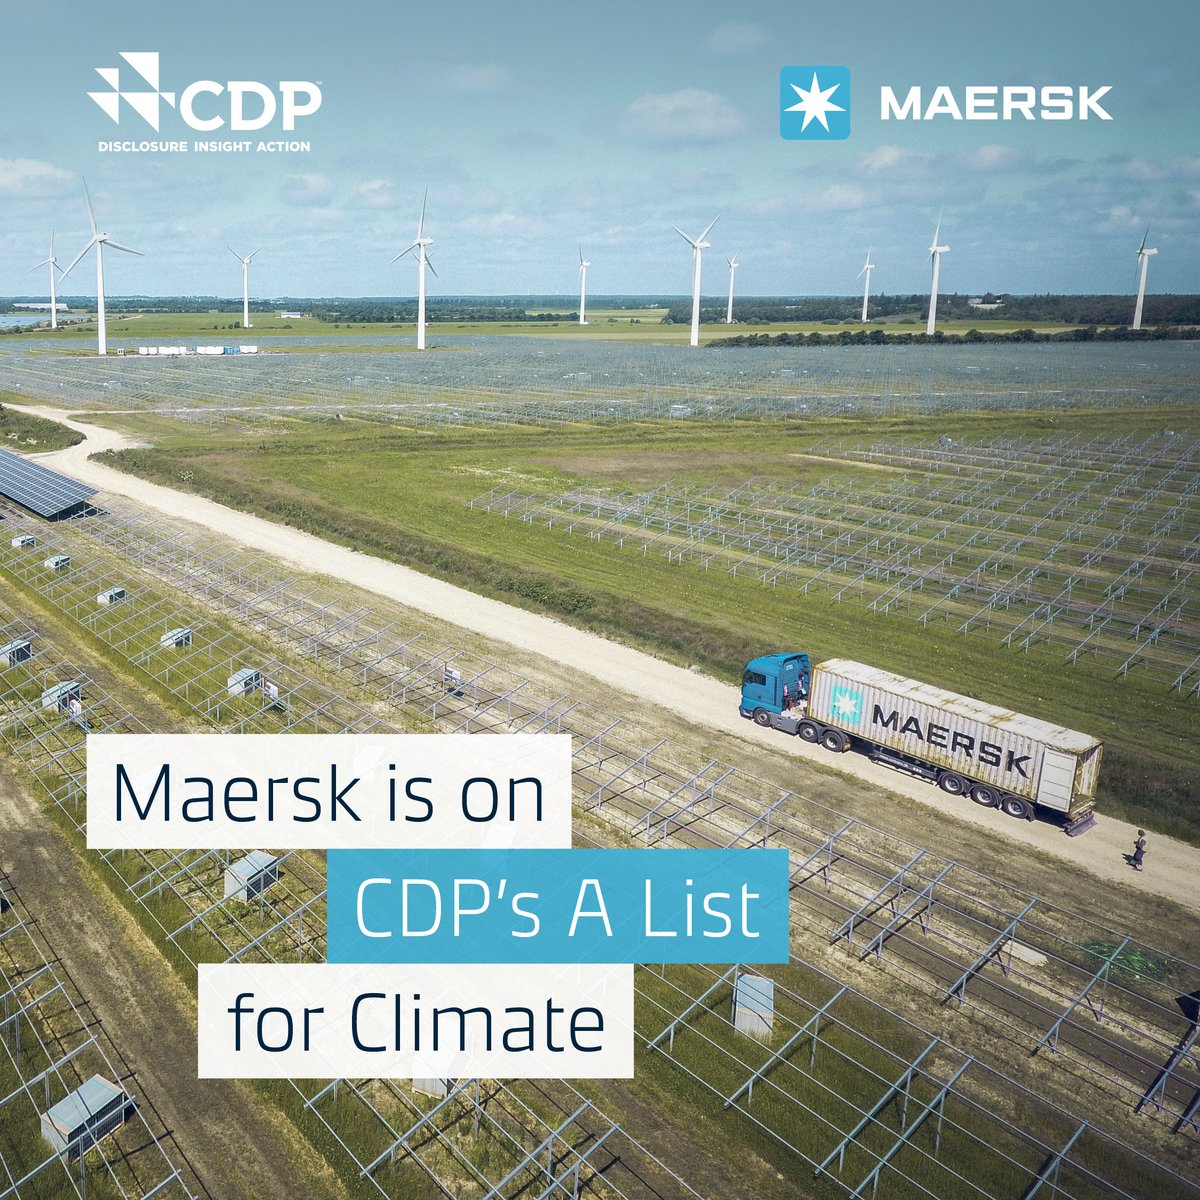 We’re proud to announce that we’ve been awarded with an A score by @CDP, recognizing our commitment to sustainability and climate action 🌎 🌱

👉 Learn more about the CDP A List: lnkd.in/dyVypMXM

#CDPAList #ESG #Maersk #decarbonisation #ClimateAction